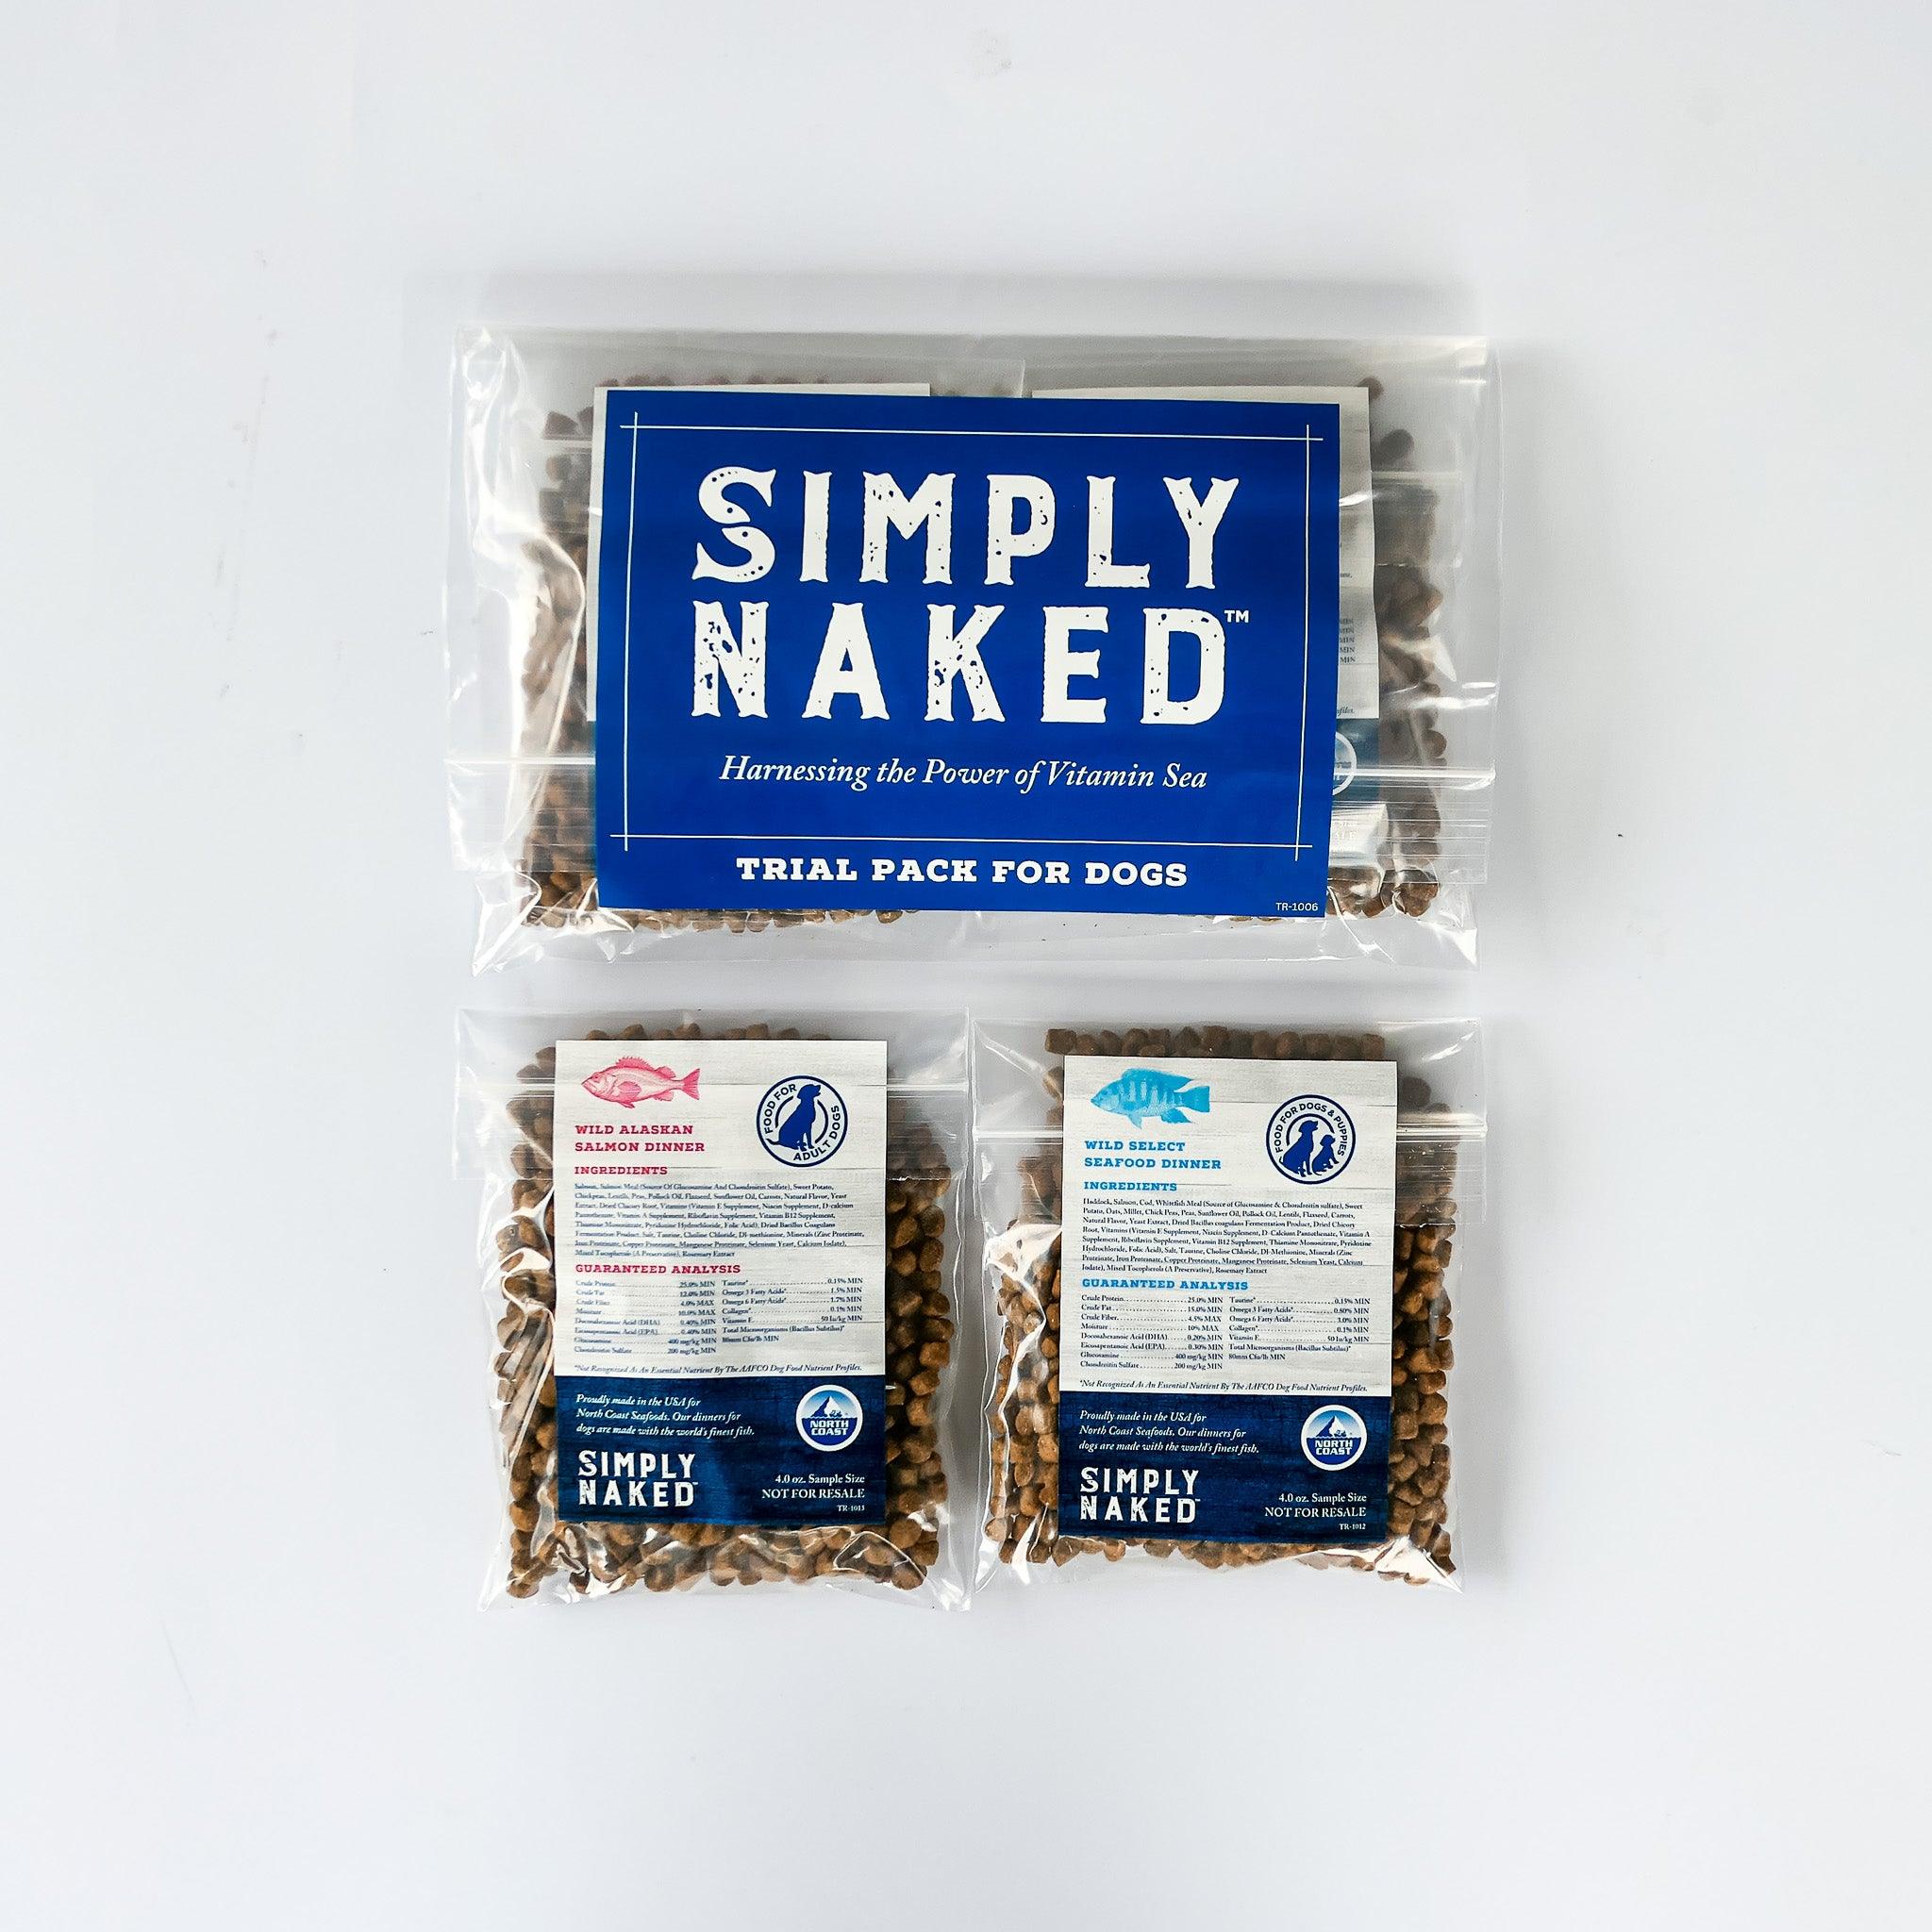 Trial Pack Sampler for Dogs with FREE SHIPPING